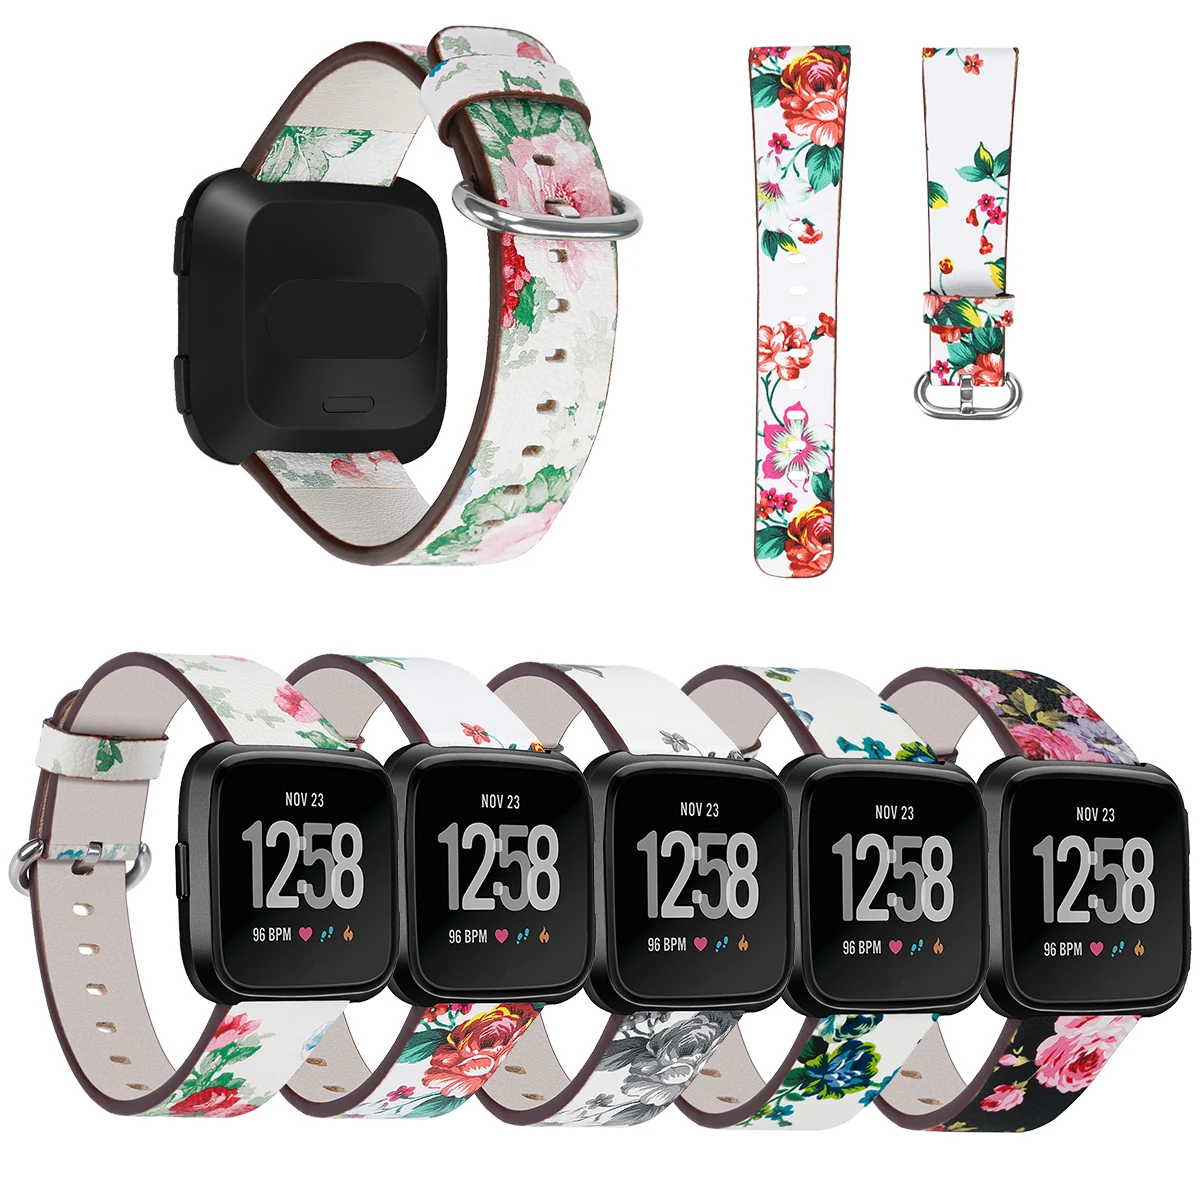 

High Premium Leather Watchband for Fitbit Versa Flowers Print Style Bracelet Watch Band Strap, 5 colors